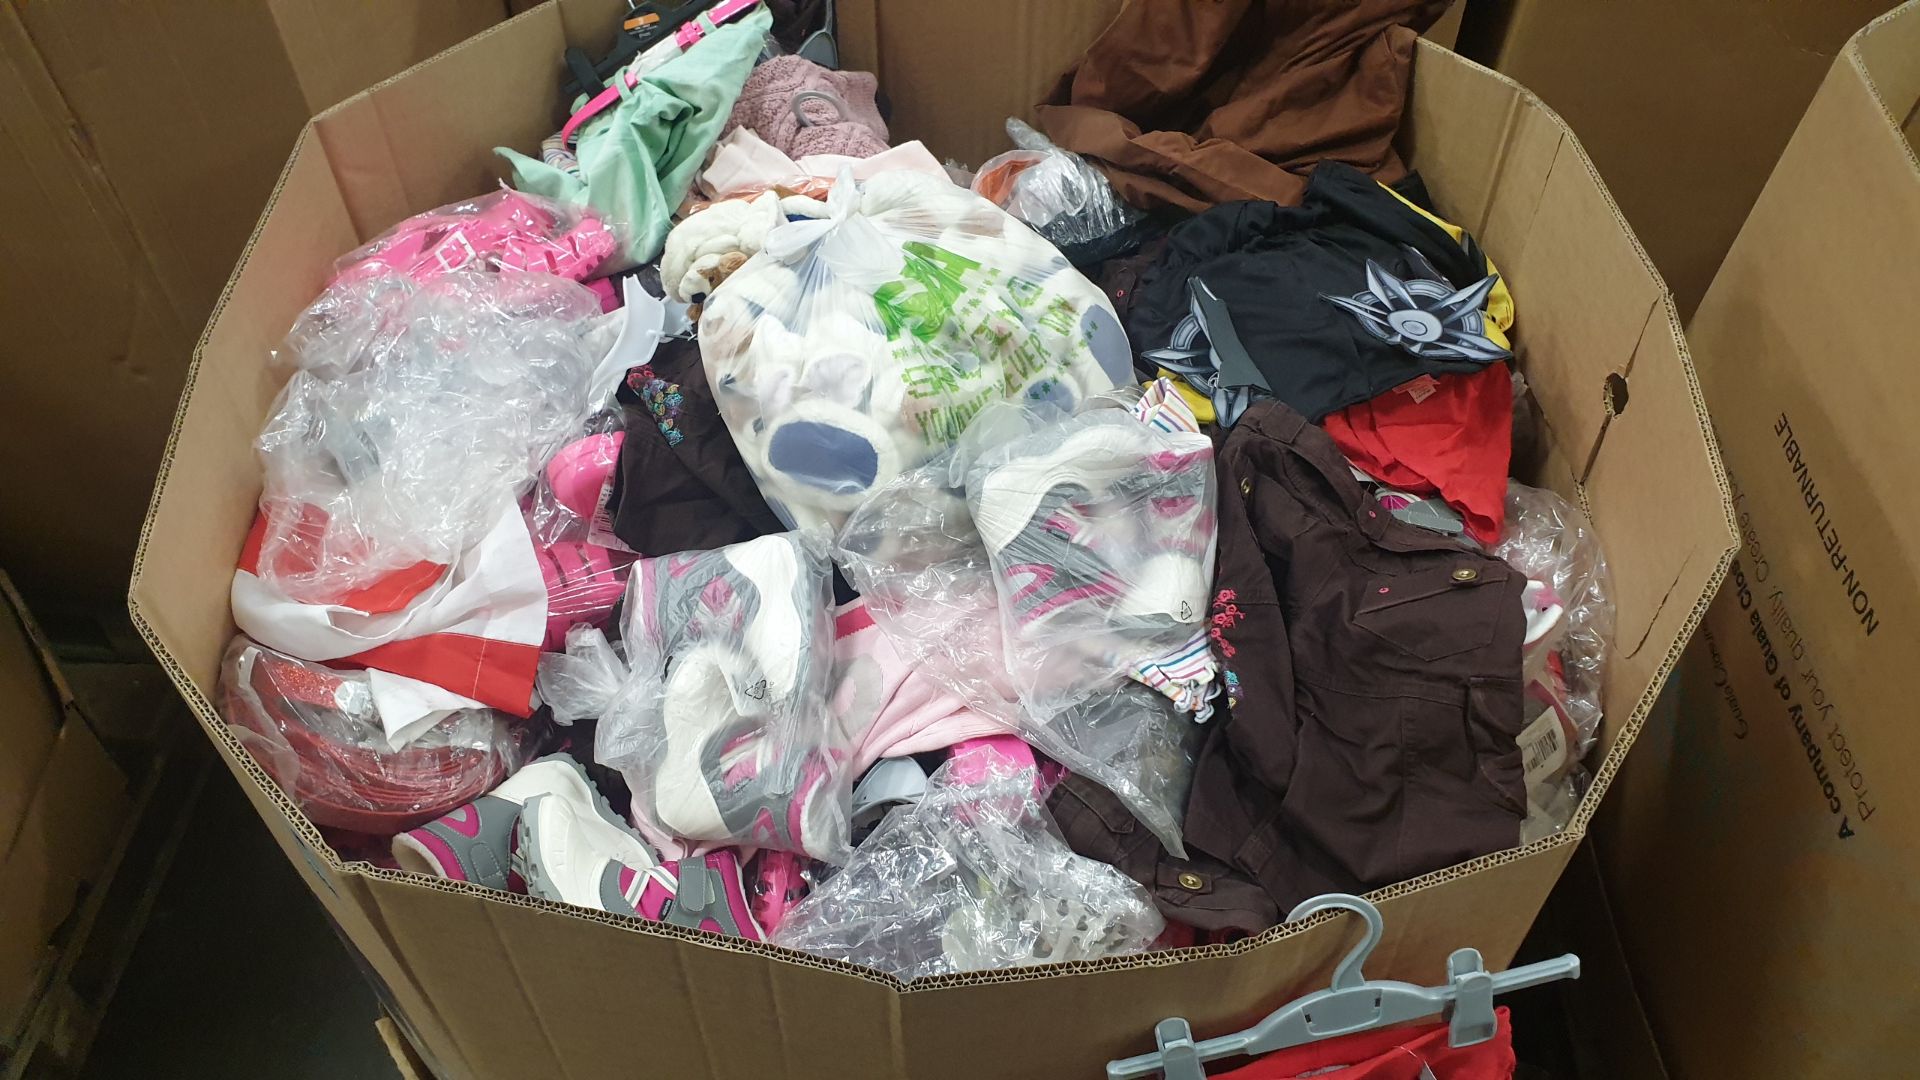 FULL PALLET OF CHILDRENS CLOTHING IE PALOMINO TOPS, TRUE ROMANCE JEANS, HOVNDR KIDS BOOTS,